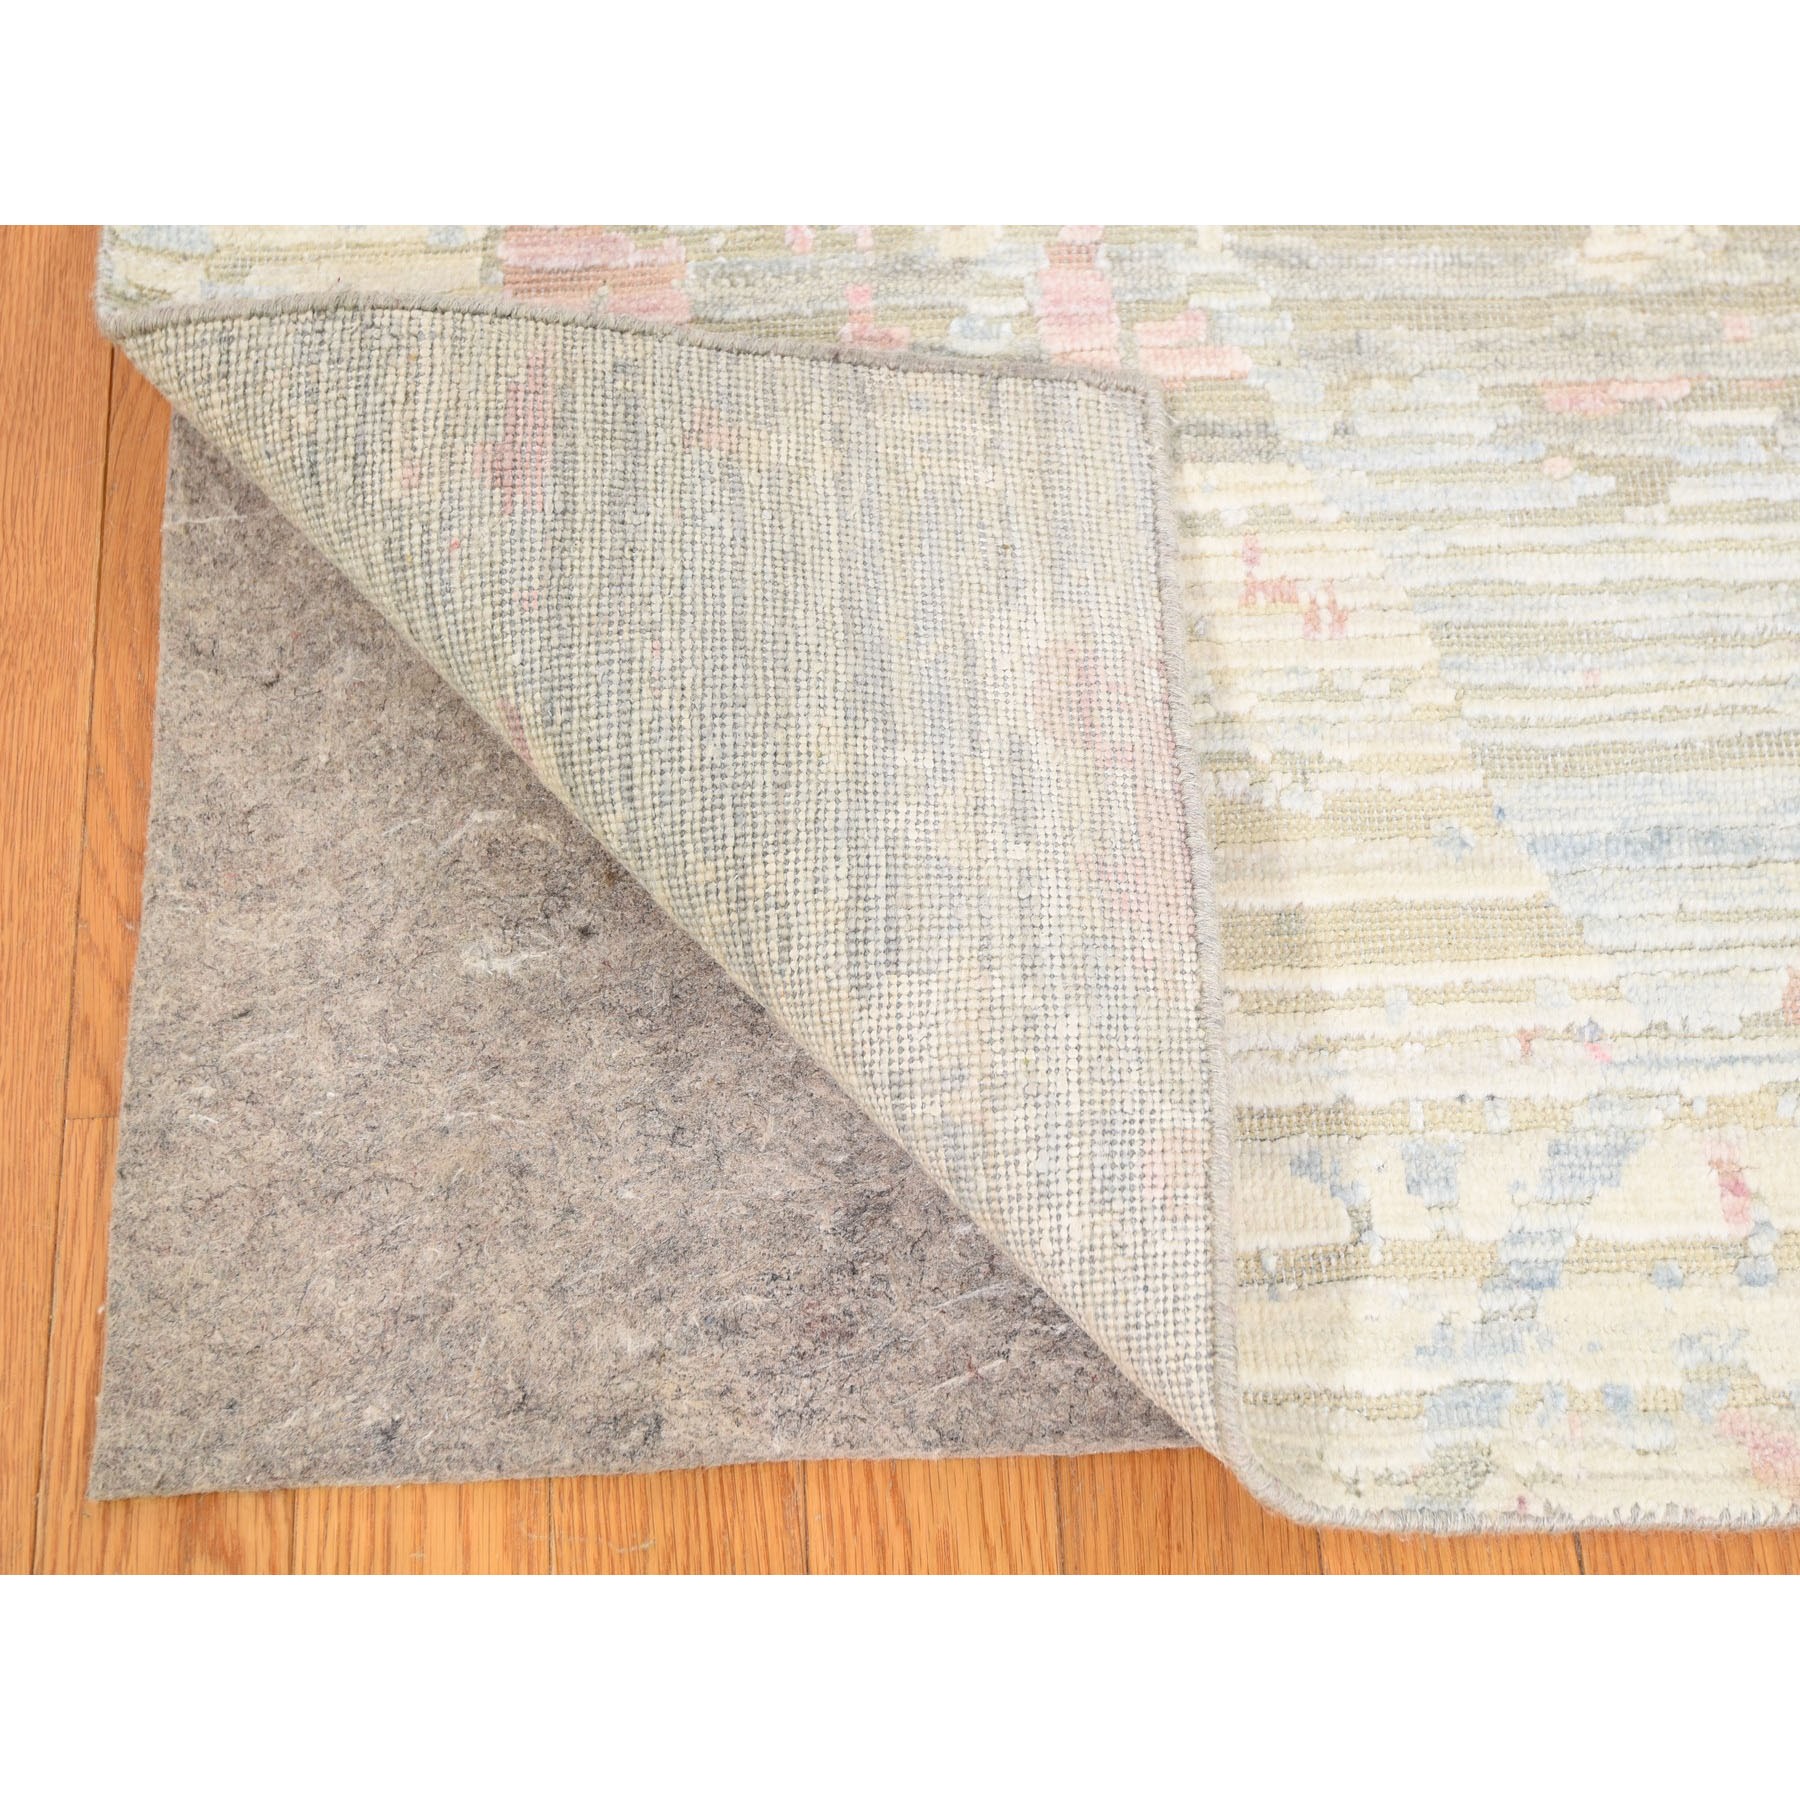 8'x10'2" THE PASTEL COLLECTION, Silk With Textured Wool Hand Woven Oriental Rug 